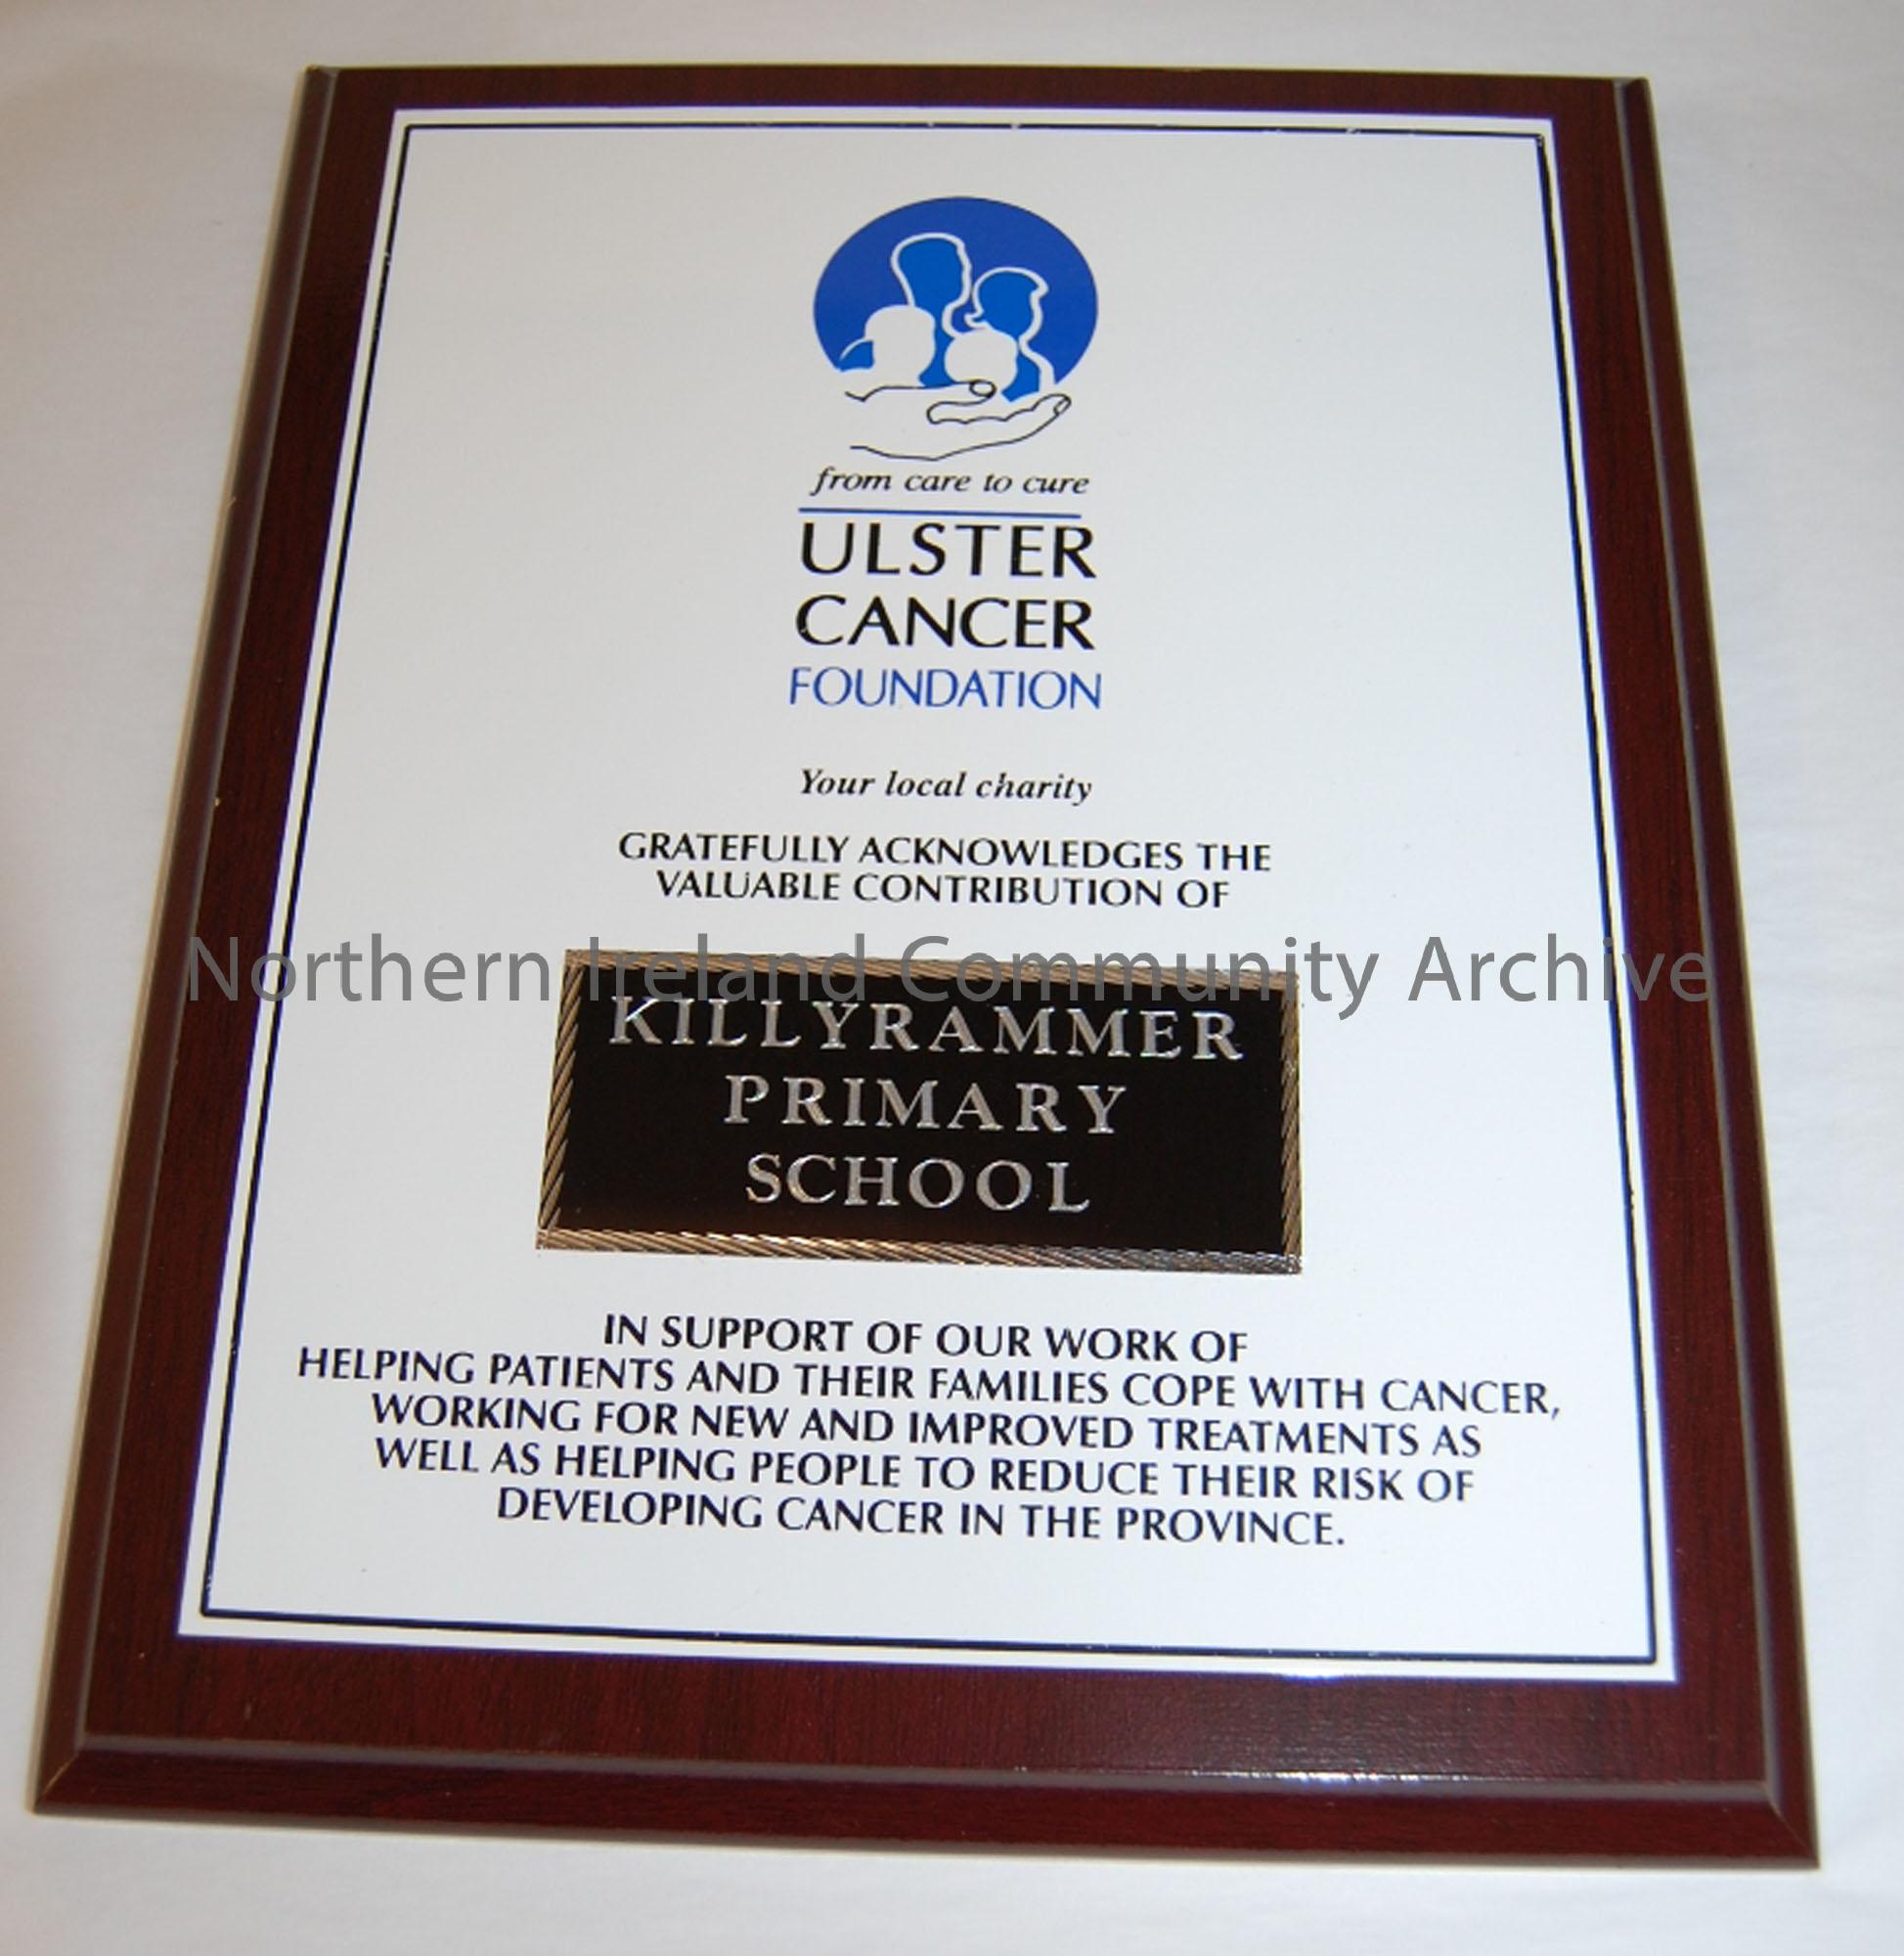 Plaque from Ulster Cancer Foundation to Killyrammer Primary School to acknowledge their charity support.